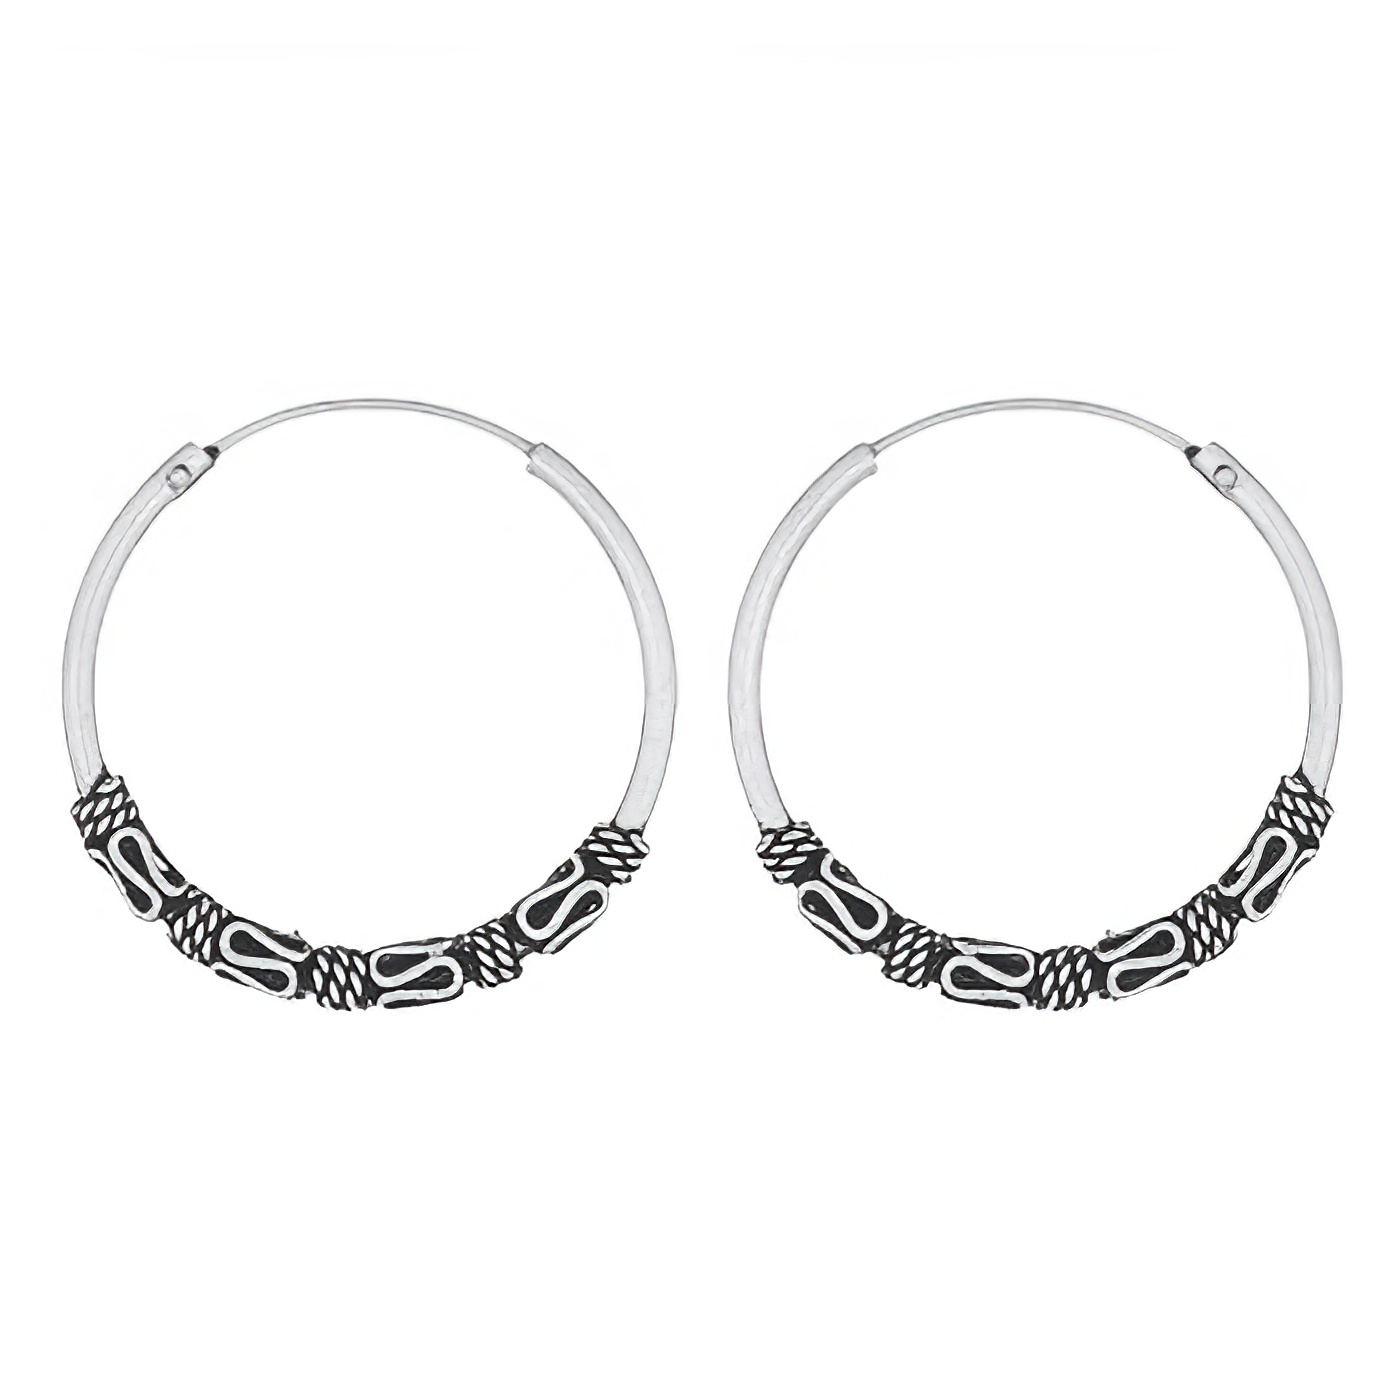 Wave Four Lines Twisted Plain Wire Bali Silver Hoop Earrings by BeYindi 